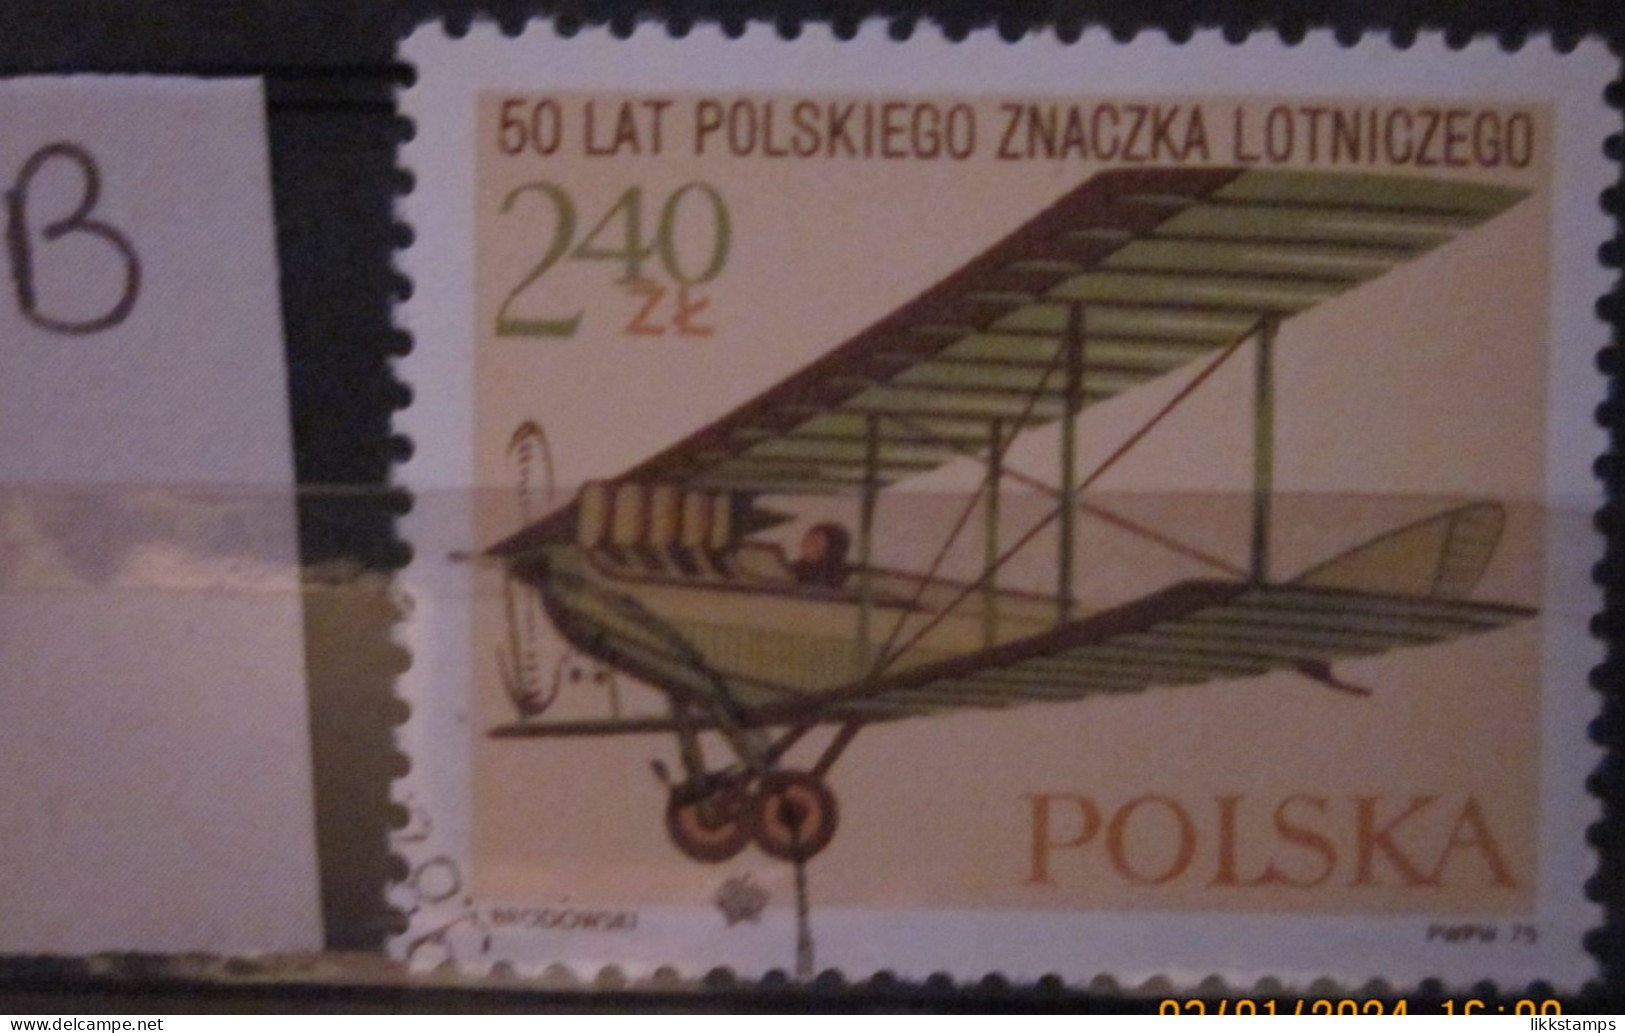 POLAND ~ 1975 ~ S.G. NUMBERS S.G. 2386. ~ LOT B' ~ AIRCRAFT ~ VFU #03519 - Used Stamps